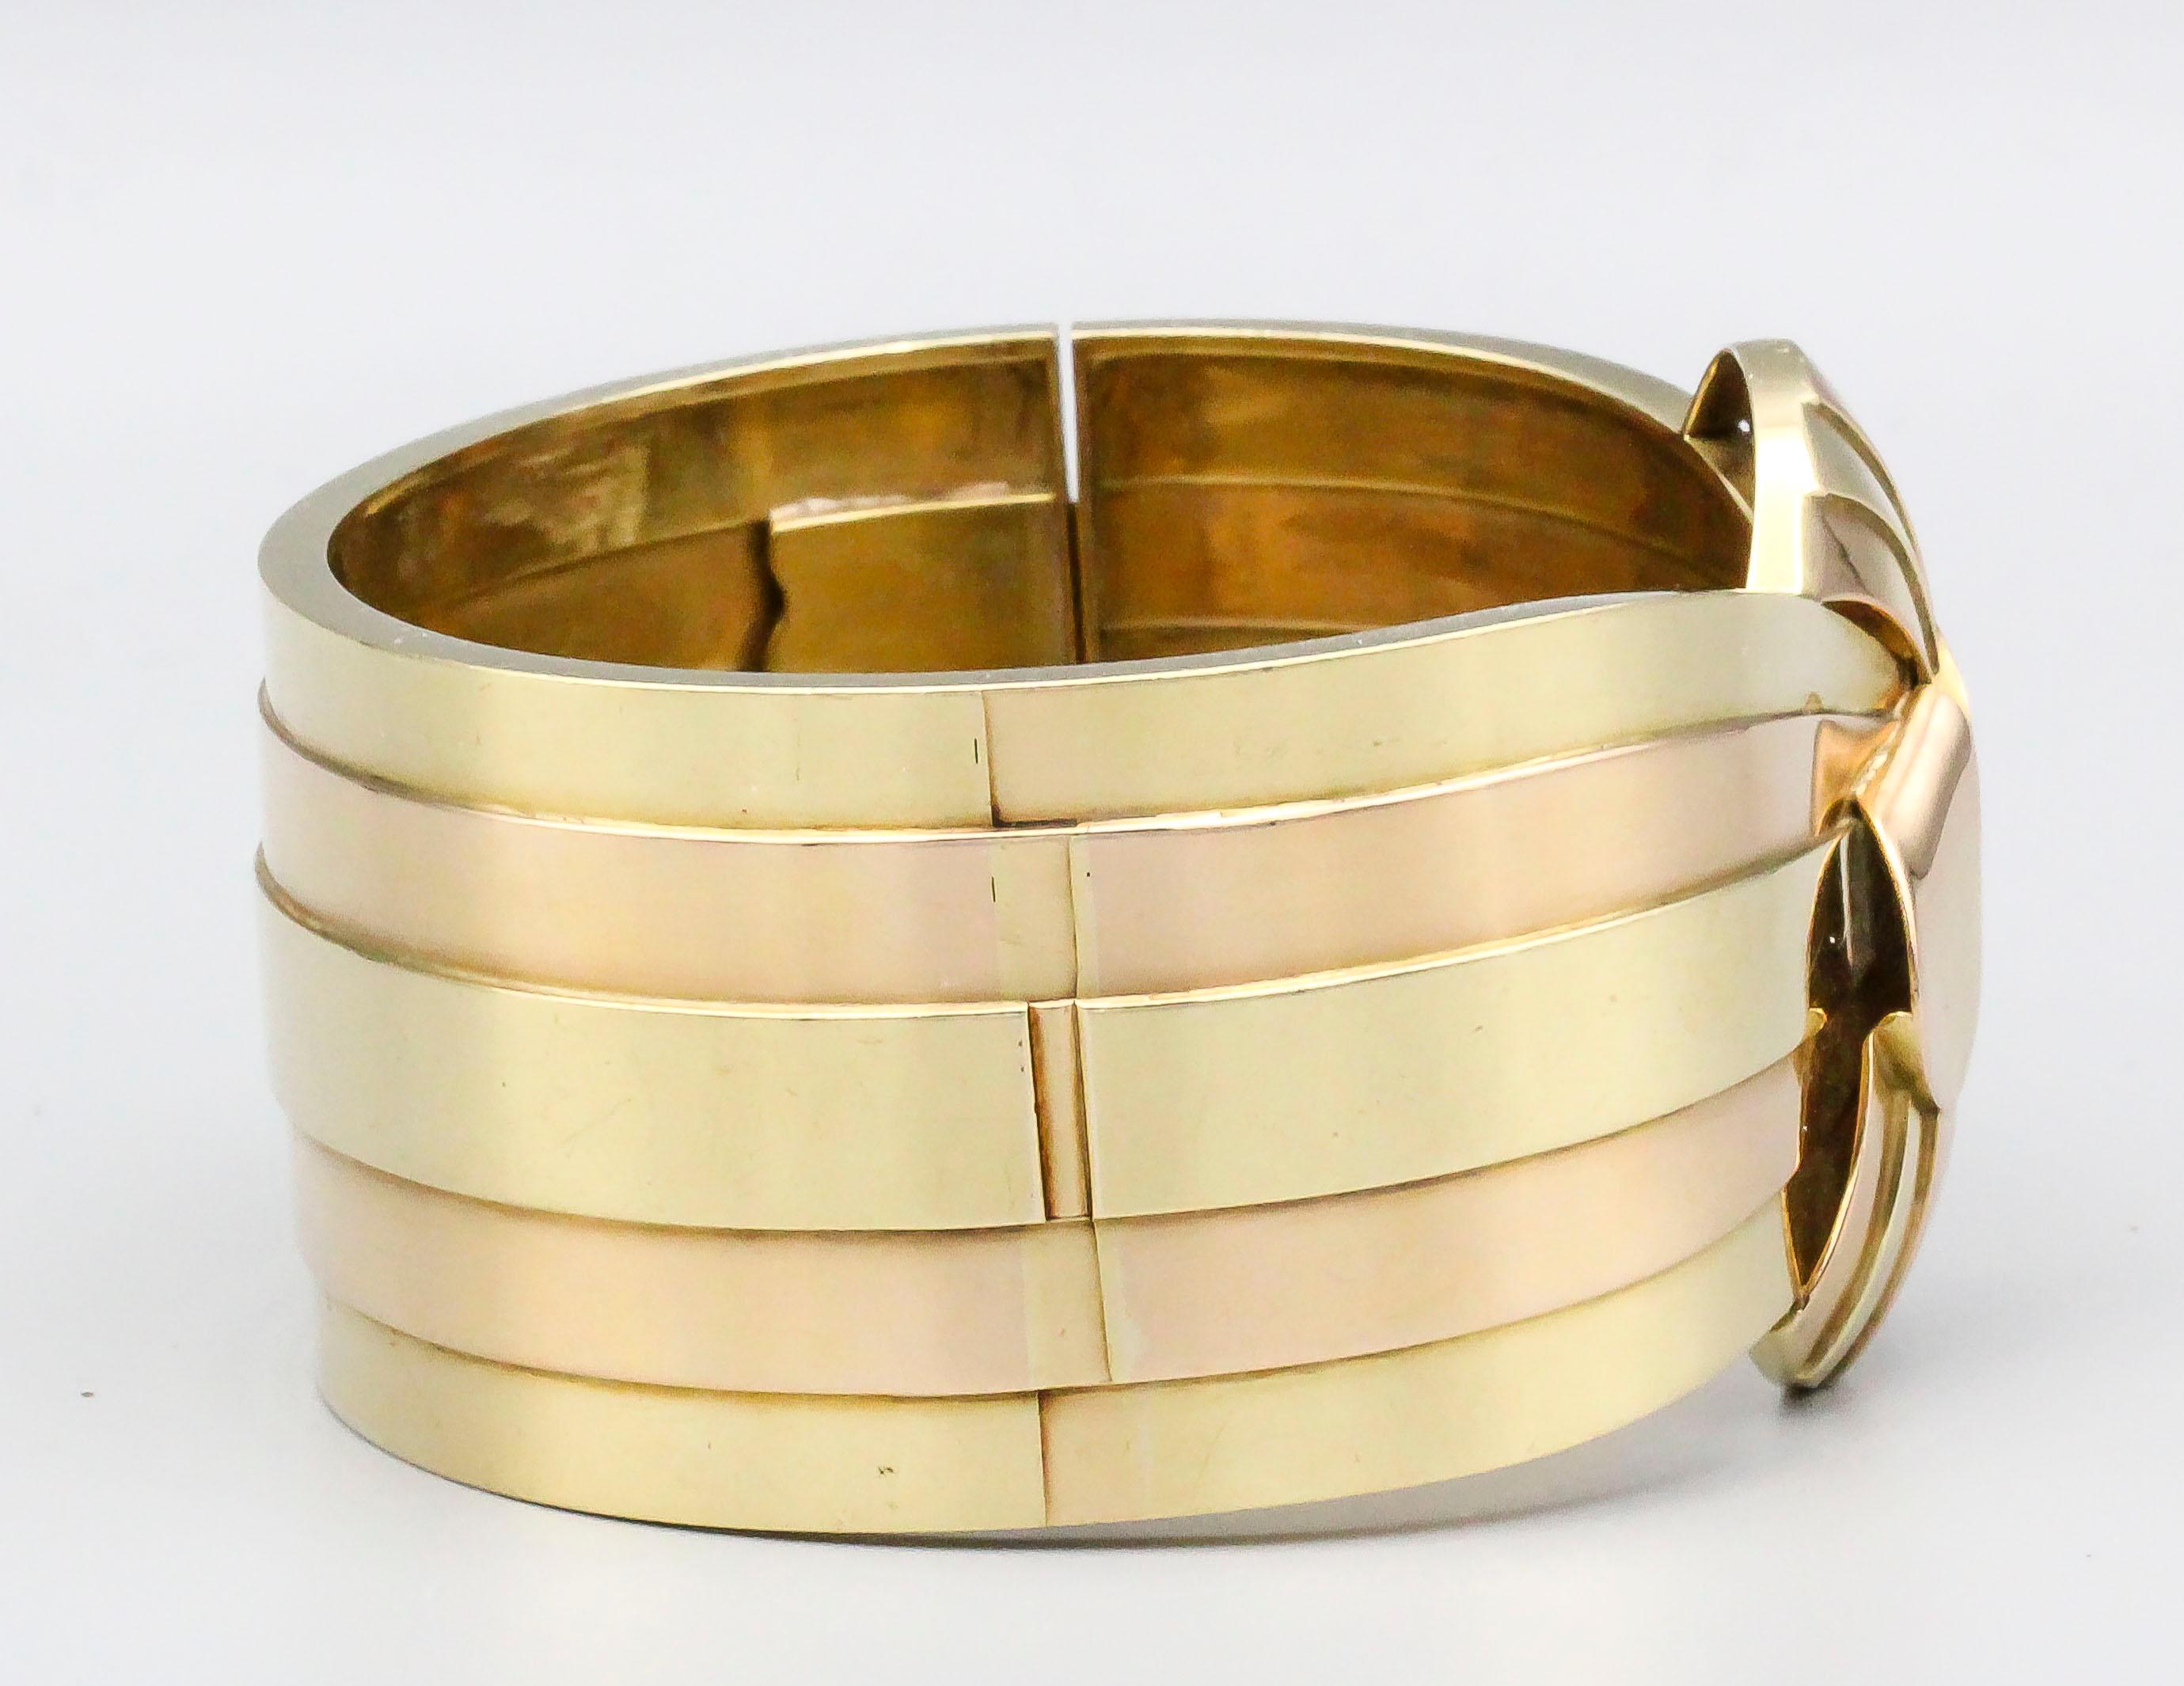 Fine 18k yellow and rose gold bangle bracelet, of French origin and circa 1940s.  Weighing over 100 grams, the bracelet is of substantial heft, and over 1.5 inch at its widest point.  Will comfortably fit a wrist size of 7-7.25 in circumference,